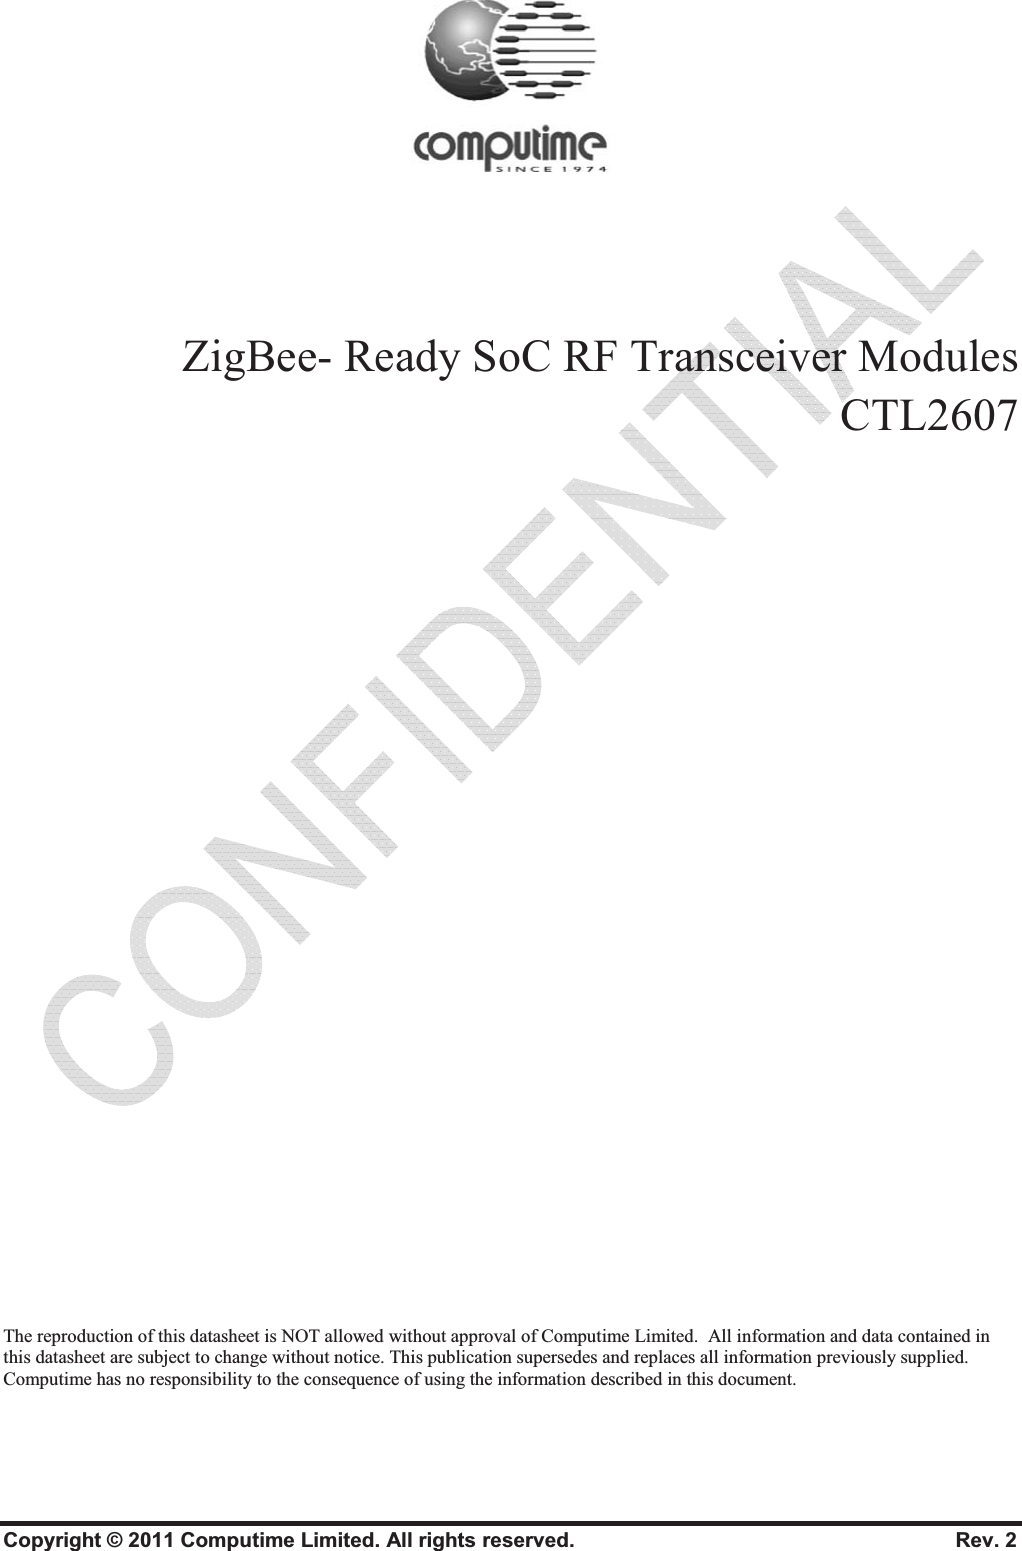 Copyright © 2011 Computime Limited. All rights reserved.                                                       Rev. 2 ZigBee- Ready SoC RF Transceiver Modules  CTL2607 The reproduction of this datasheet is NOT allowed without approval of Computime Limited.  All information and data contained in this datasheet are subject to change without notice. This publication supersedes and replaces all information previously supplied. Computime has no responsibility to the consequence of using the information described in this document.